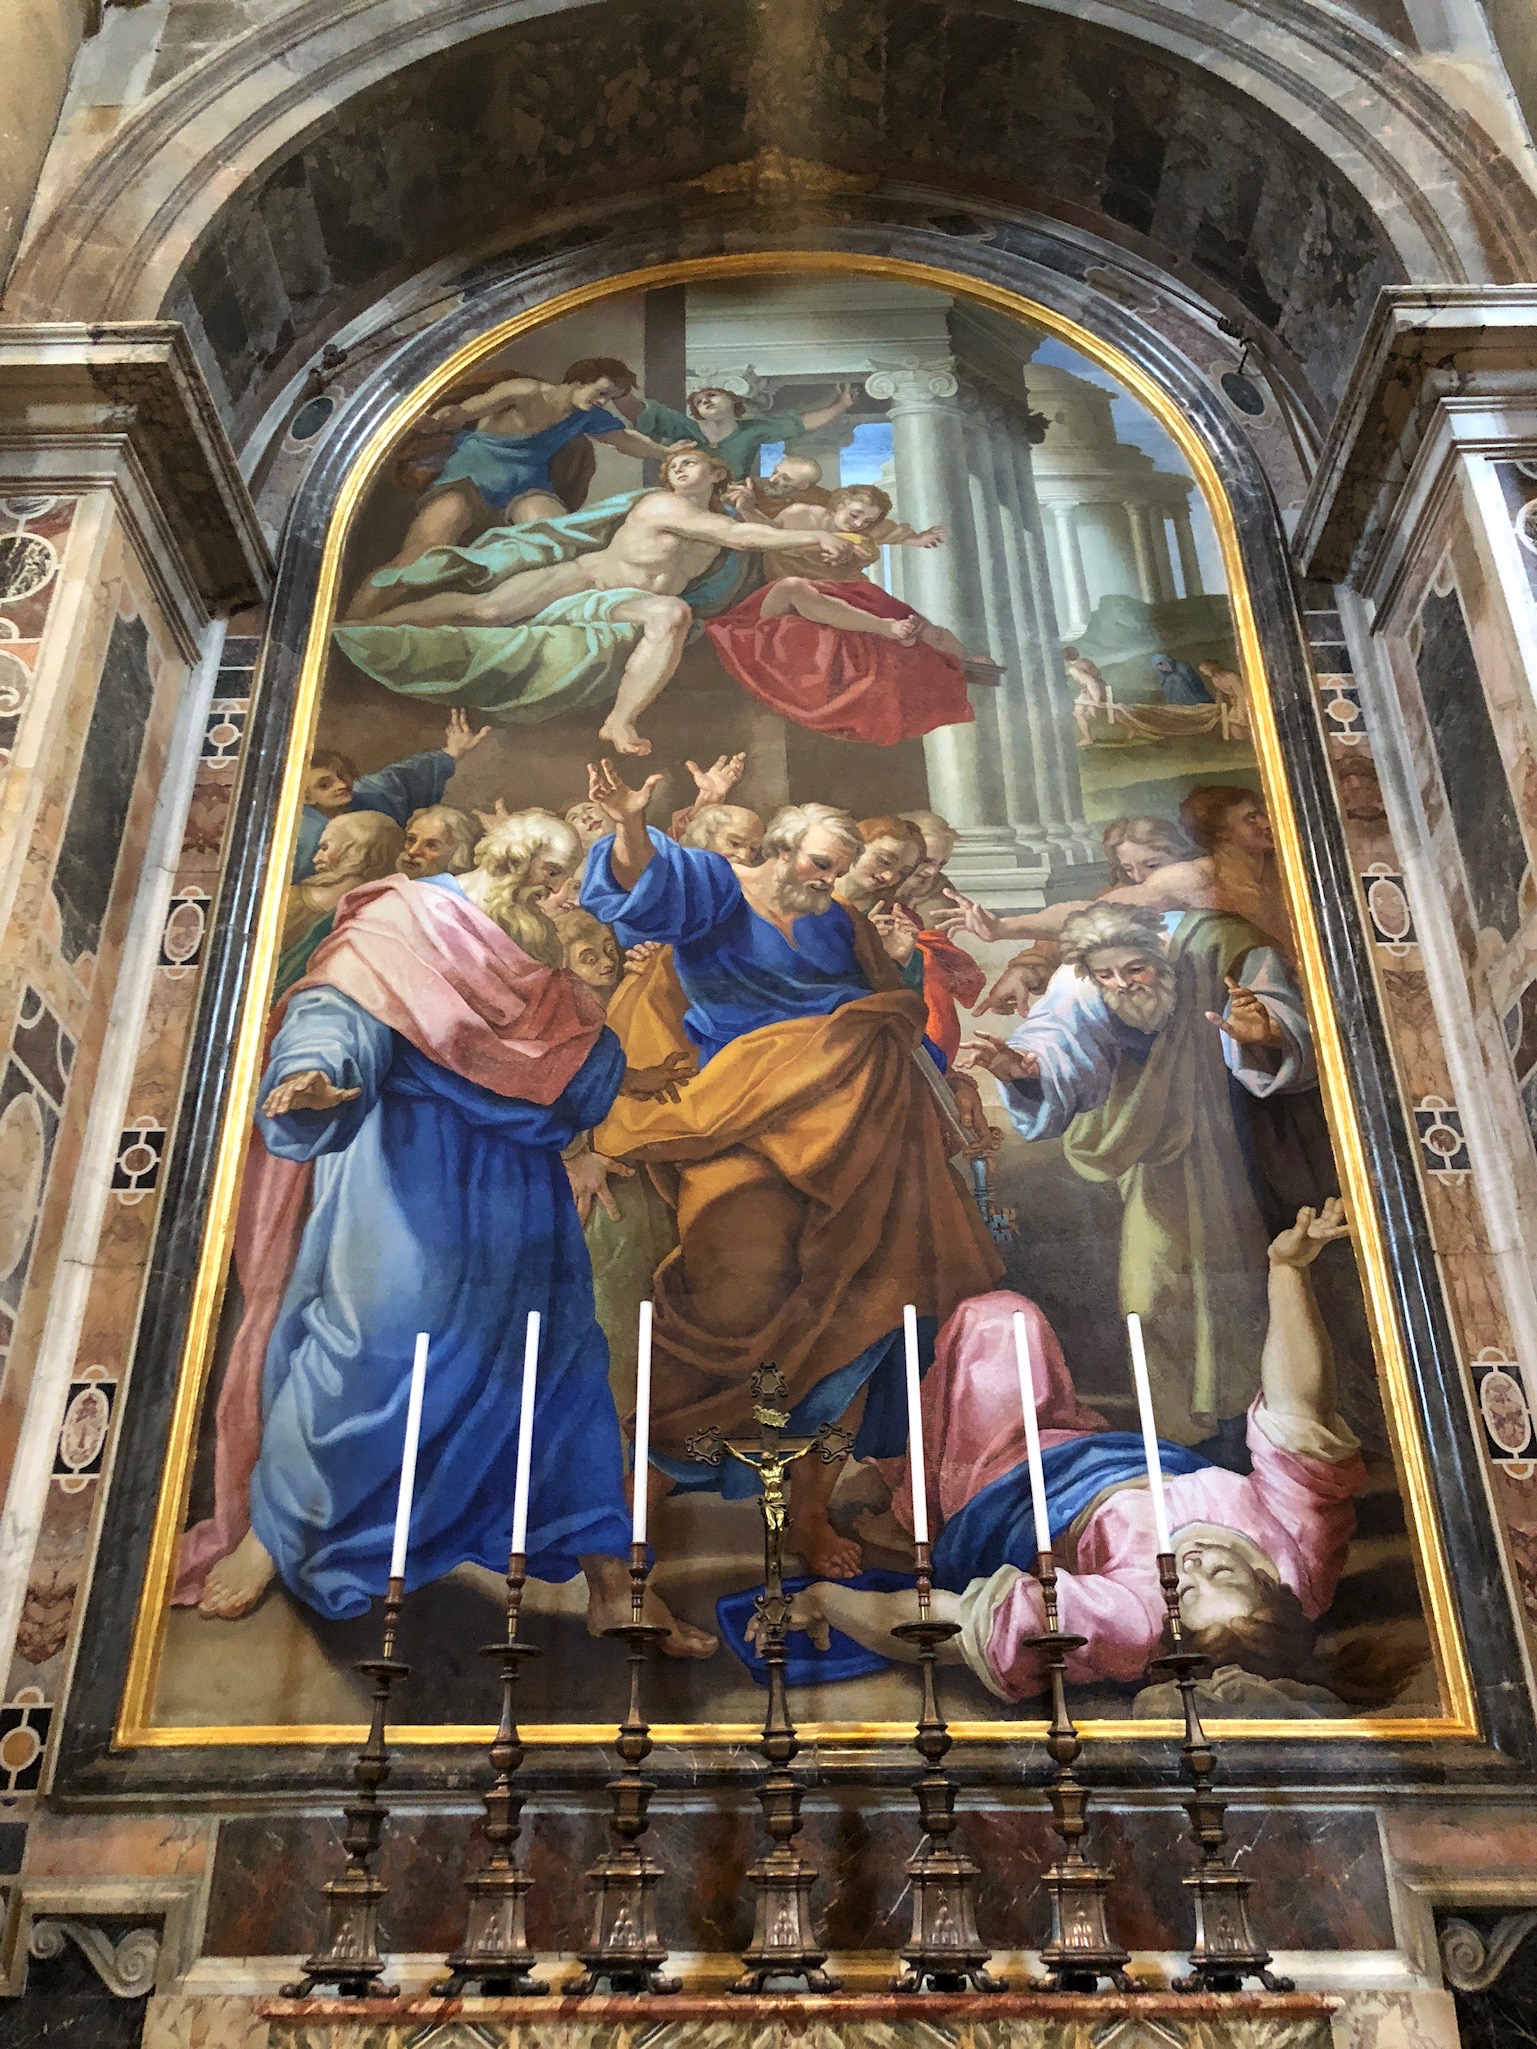 All of the paintings in St. Peter's Basilica are actually made of miniature mosaic tiles to avoid the possibility of the regular paintings fading over time.